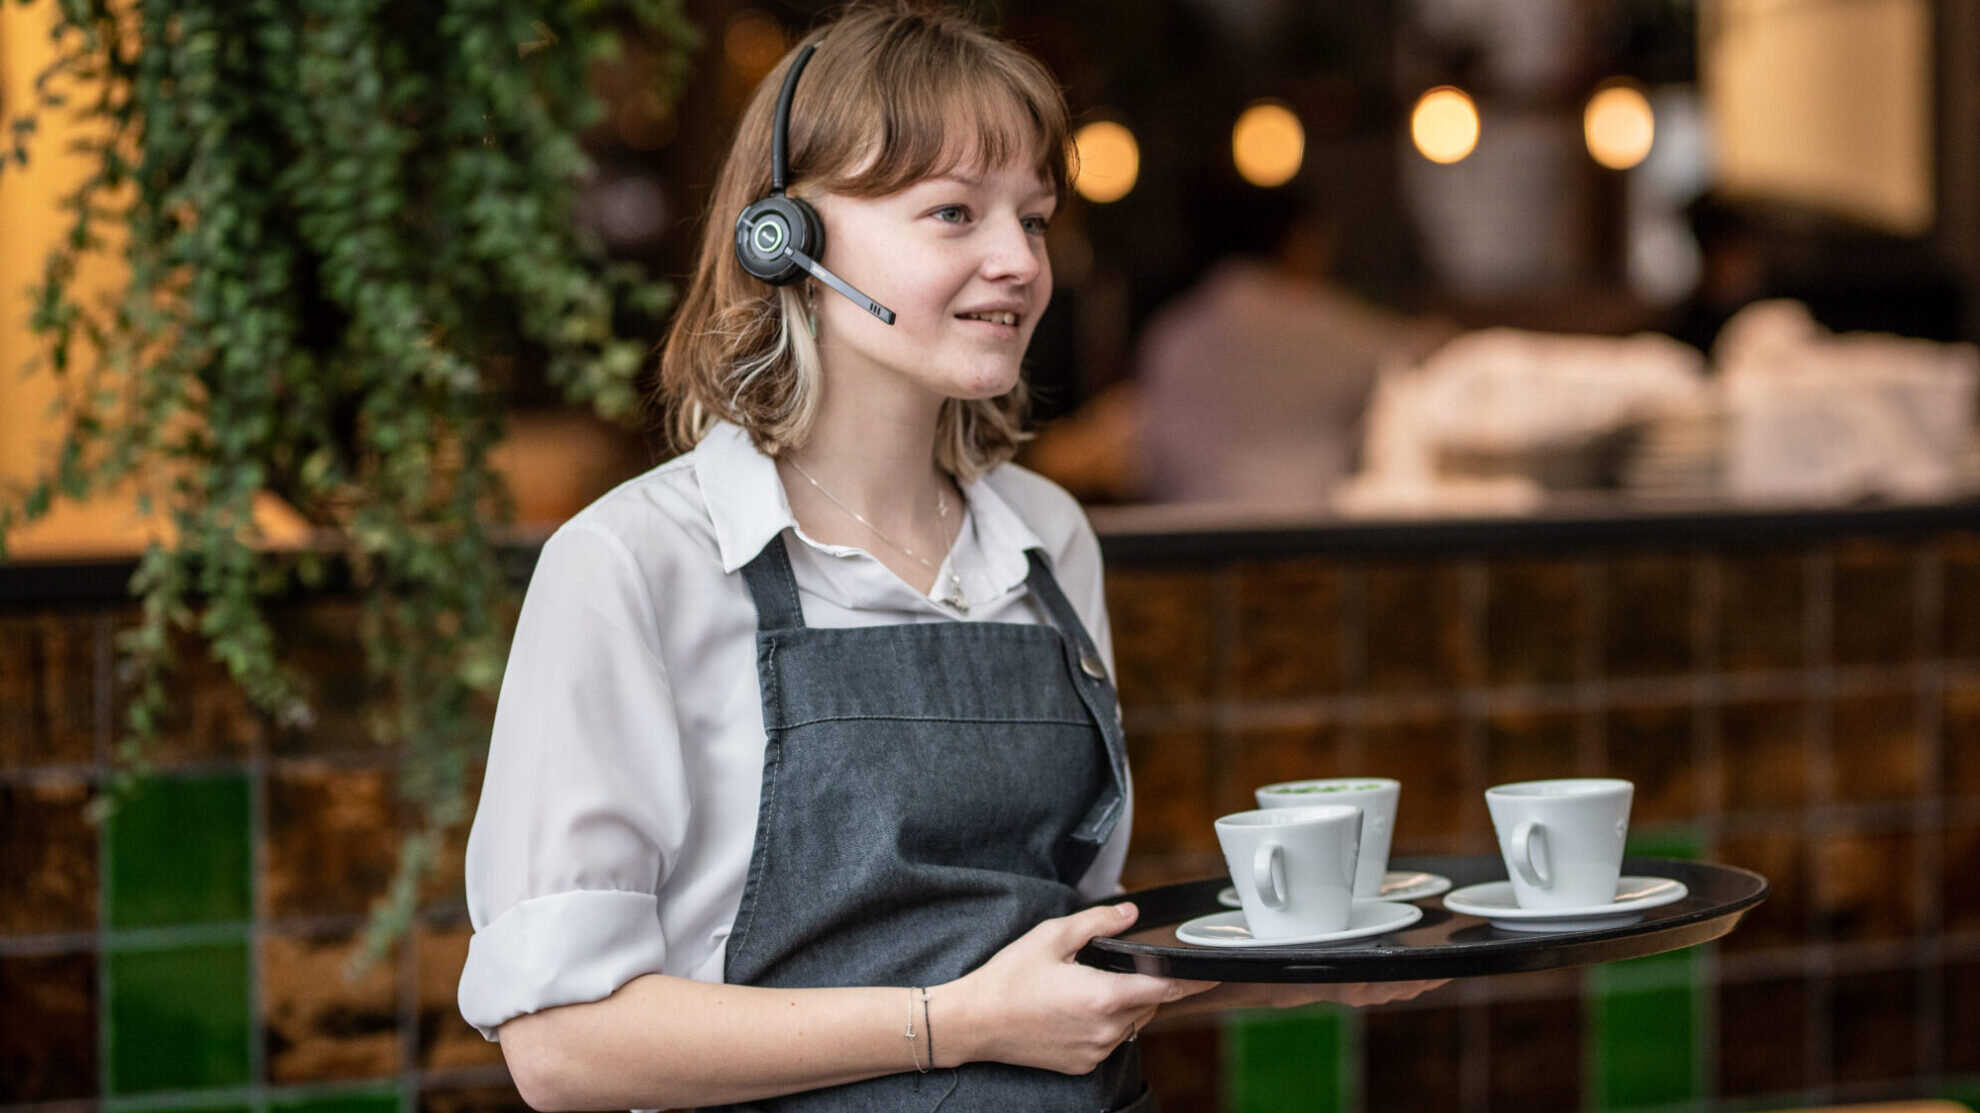 United Headsets DECT headset hospitality industry